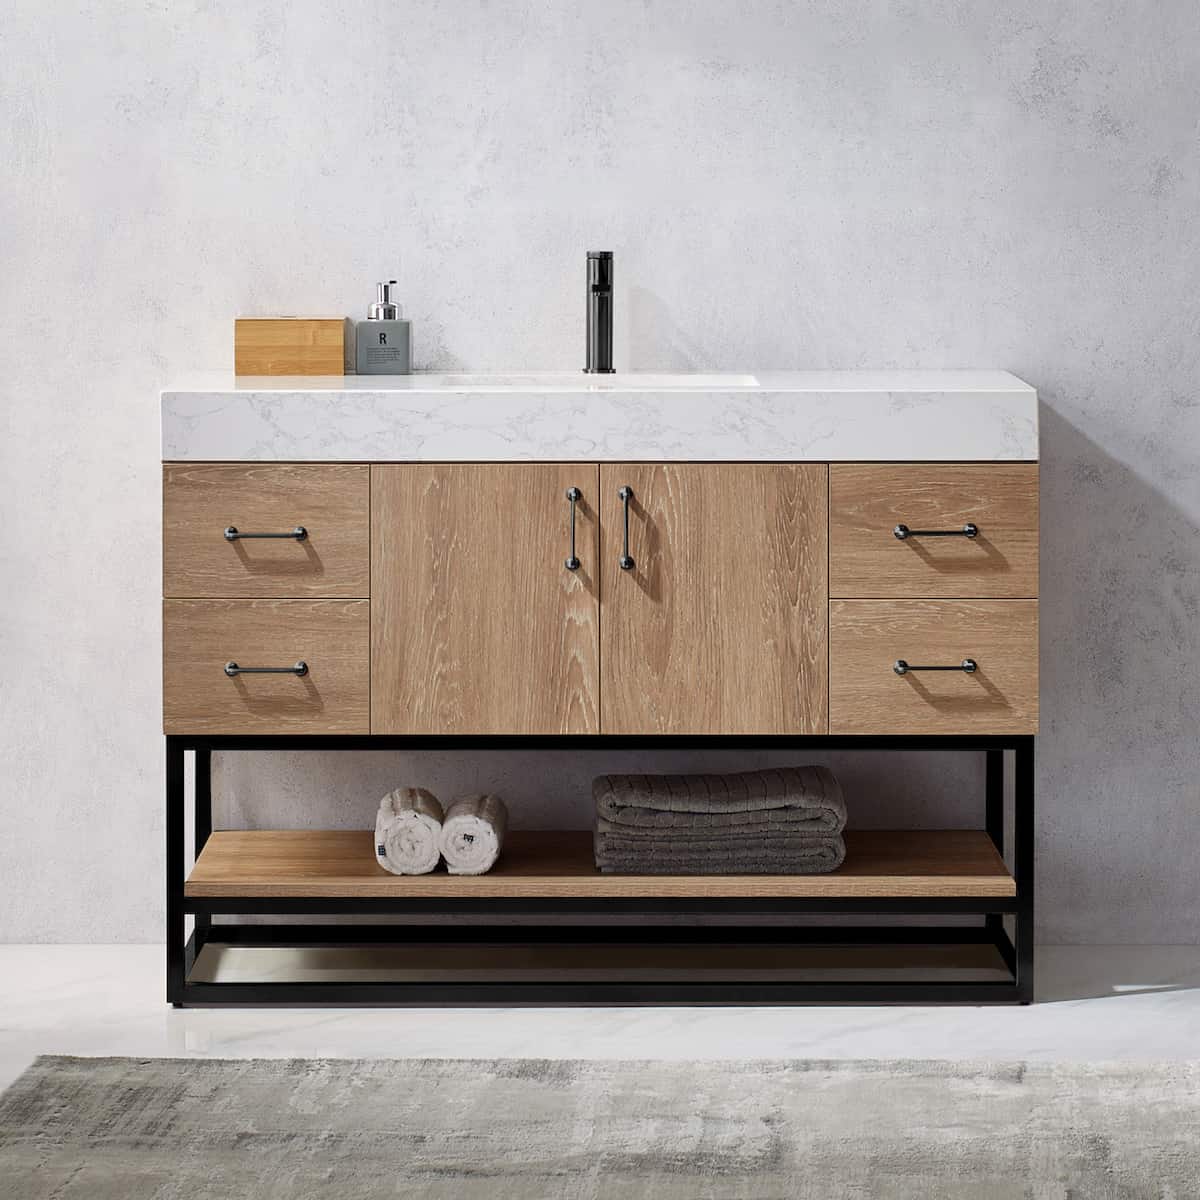 Vinnova Alistair 48 Inch Freestanding Single Vanity in North American Oak and Matte Black Frame with White Grain Stone Countertop Without Mirror in Bathroom 789048B-NO-GW-NM